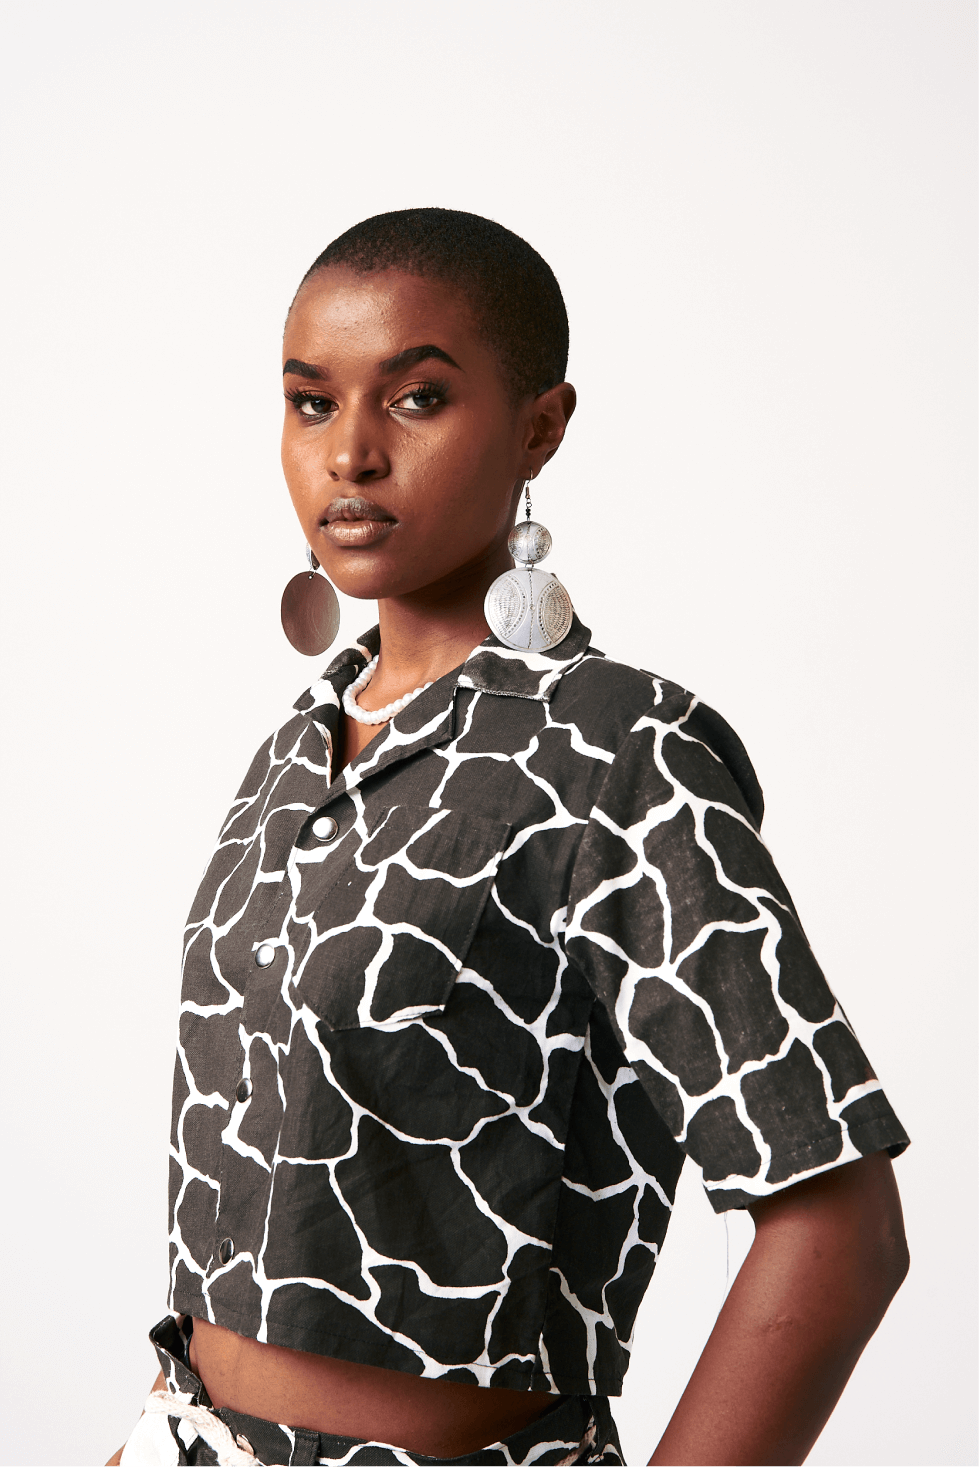 Shop Twiga Print Top by Nairobi Apparel District on Arrai. Discover stylish, affordable clothing, jewelry, handbags and unique handmade pieces from top Kenyan & African fashion brands prioritising sustainability and quality craftsmanship.